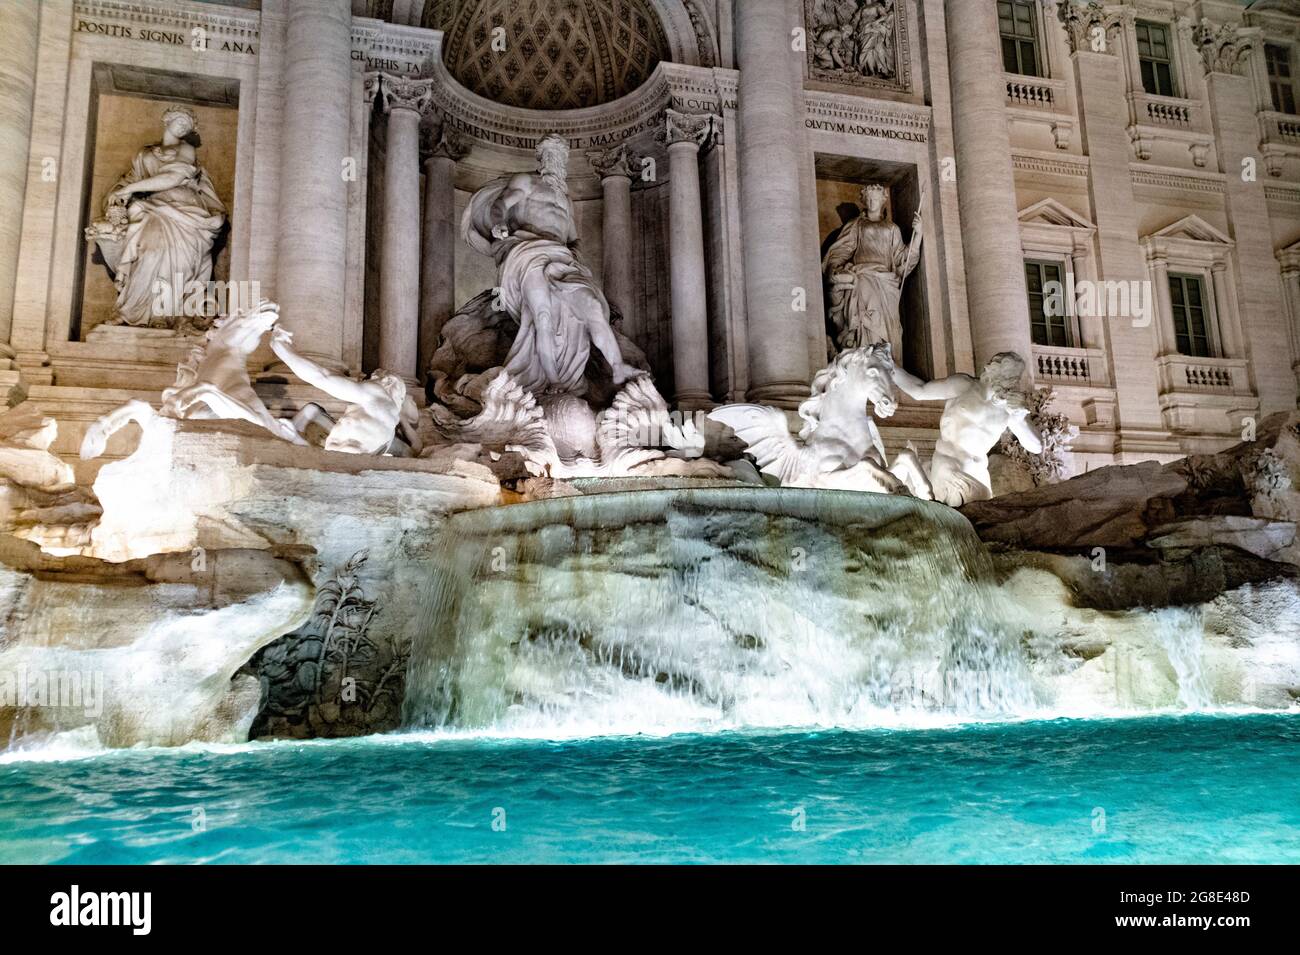 Europe - Italy, capital city Rome: A detail view of the Trevi Fountain which is one of the most popular spots in Rome, thousands of people visit the f Stock Photo